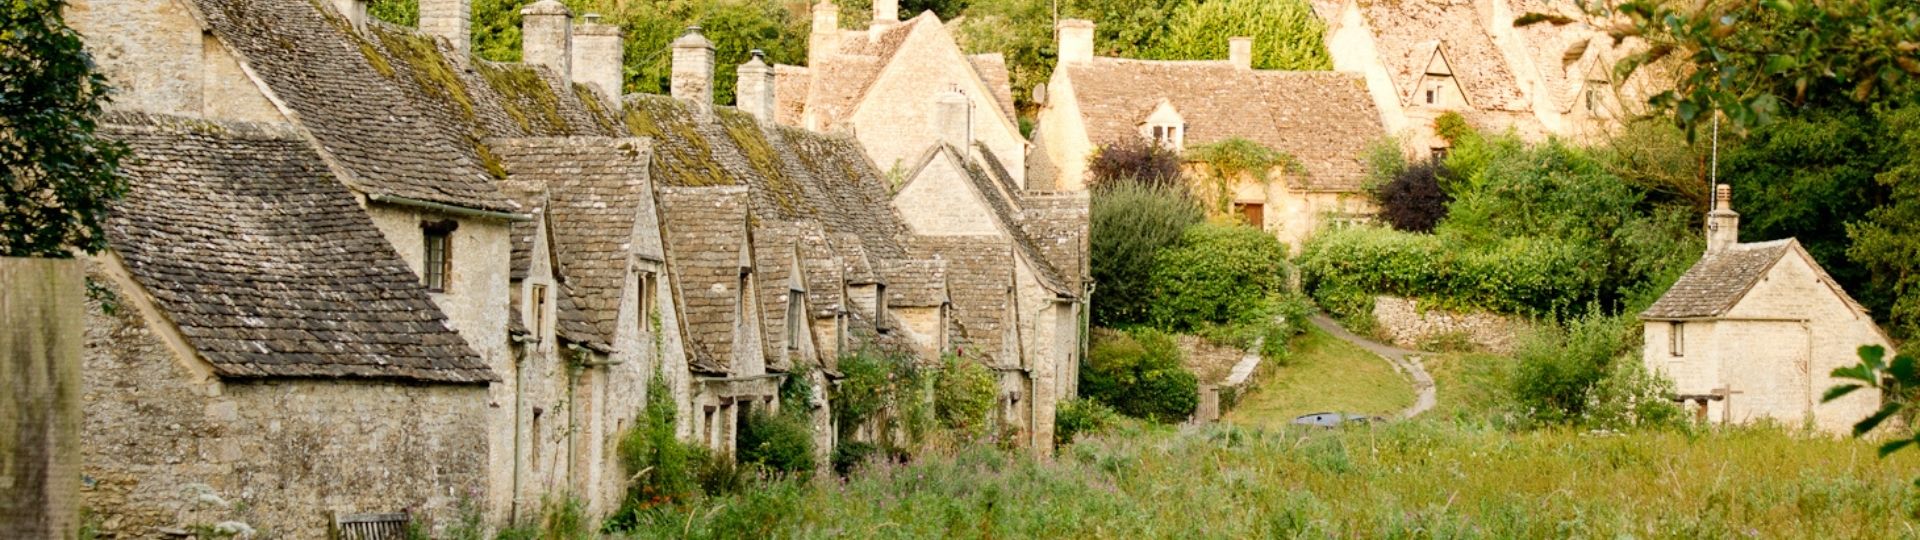 BIBURY - Cotswold Village of The Month